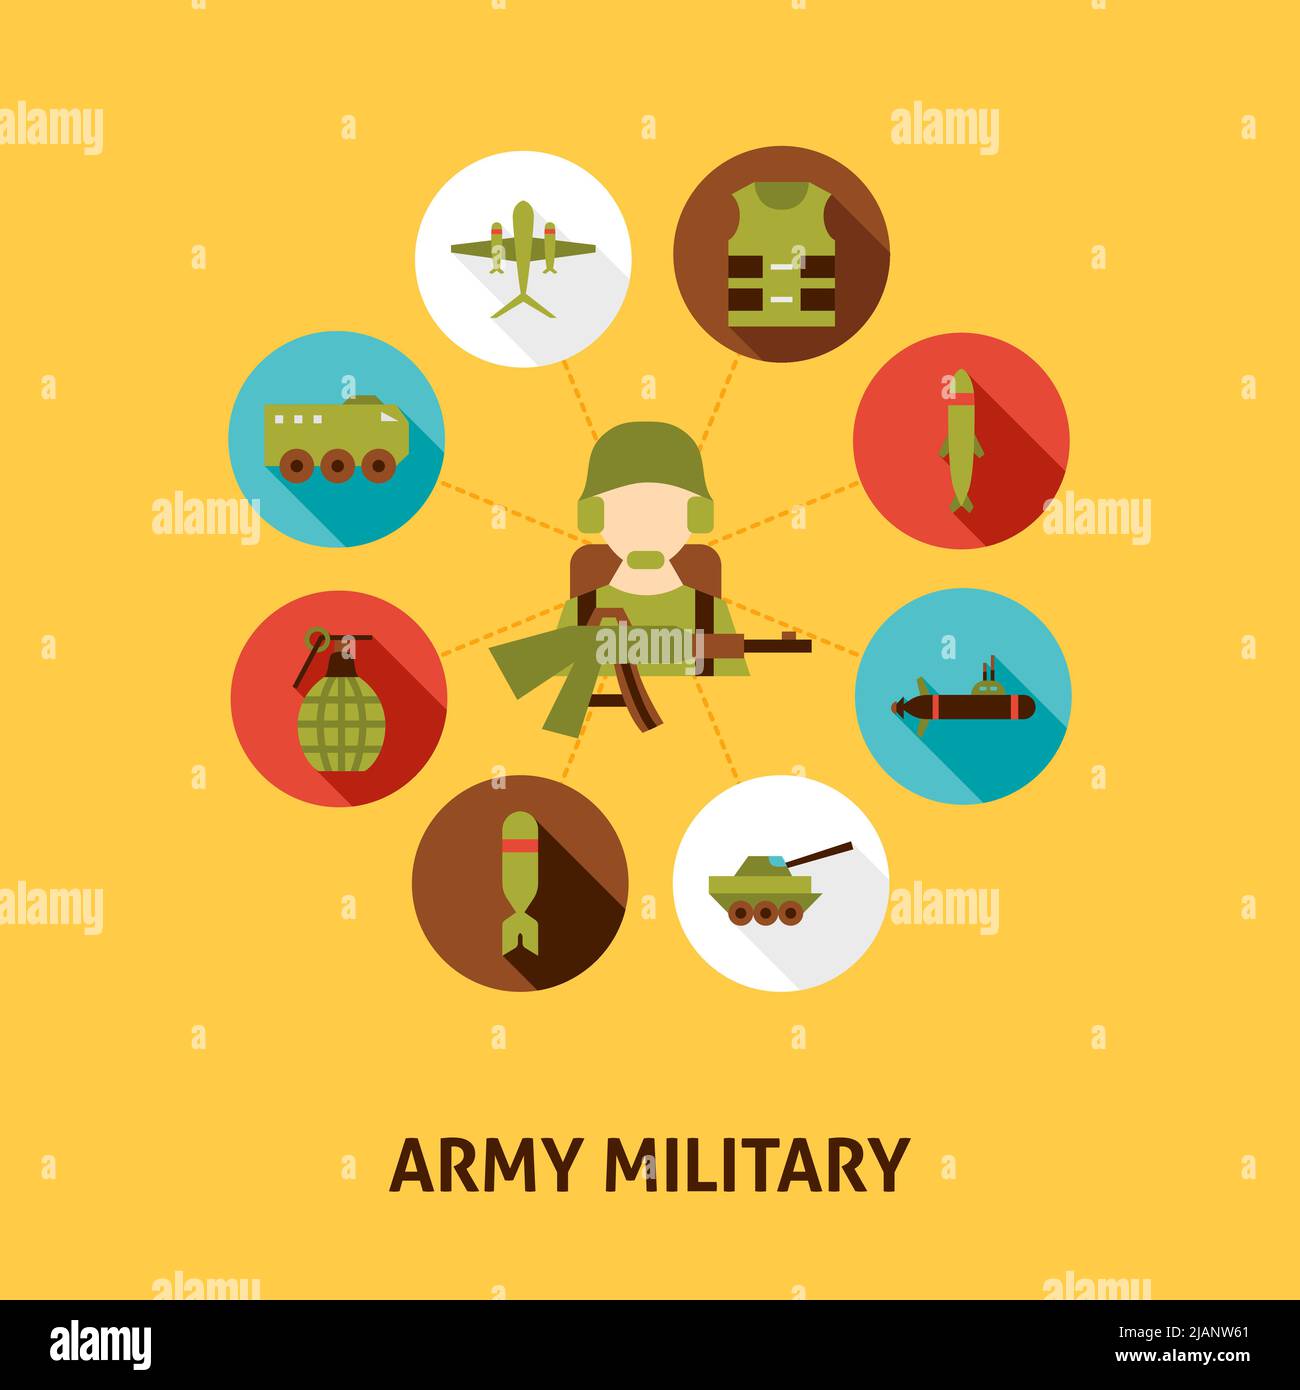 Army Military Concept Icons Stock Vector